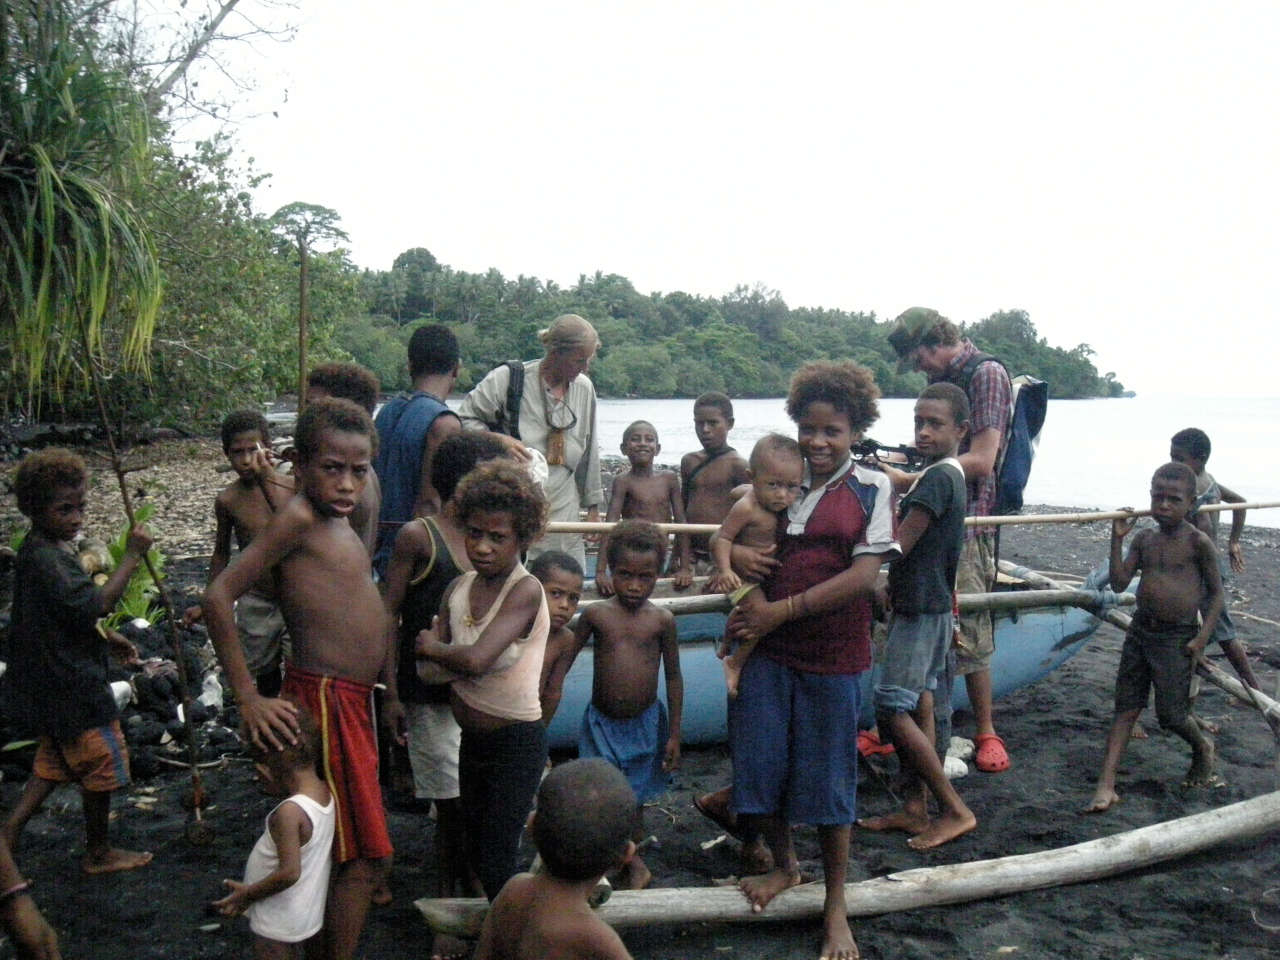 Hanneke surrounded by children, examining an outrigger canoe